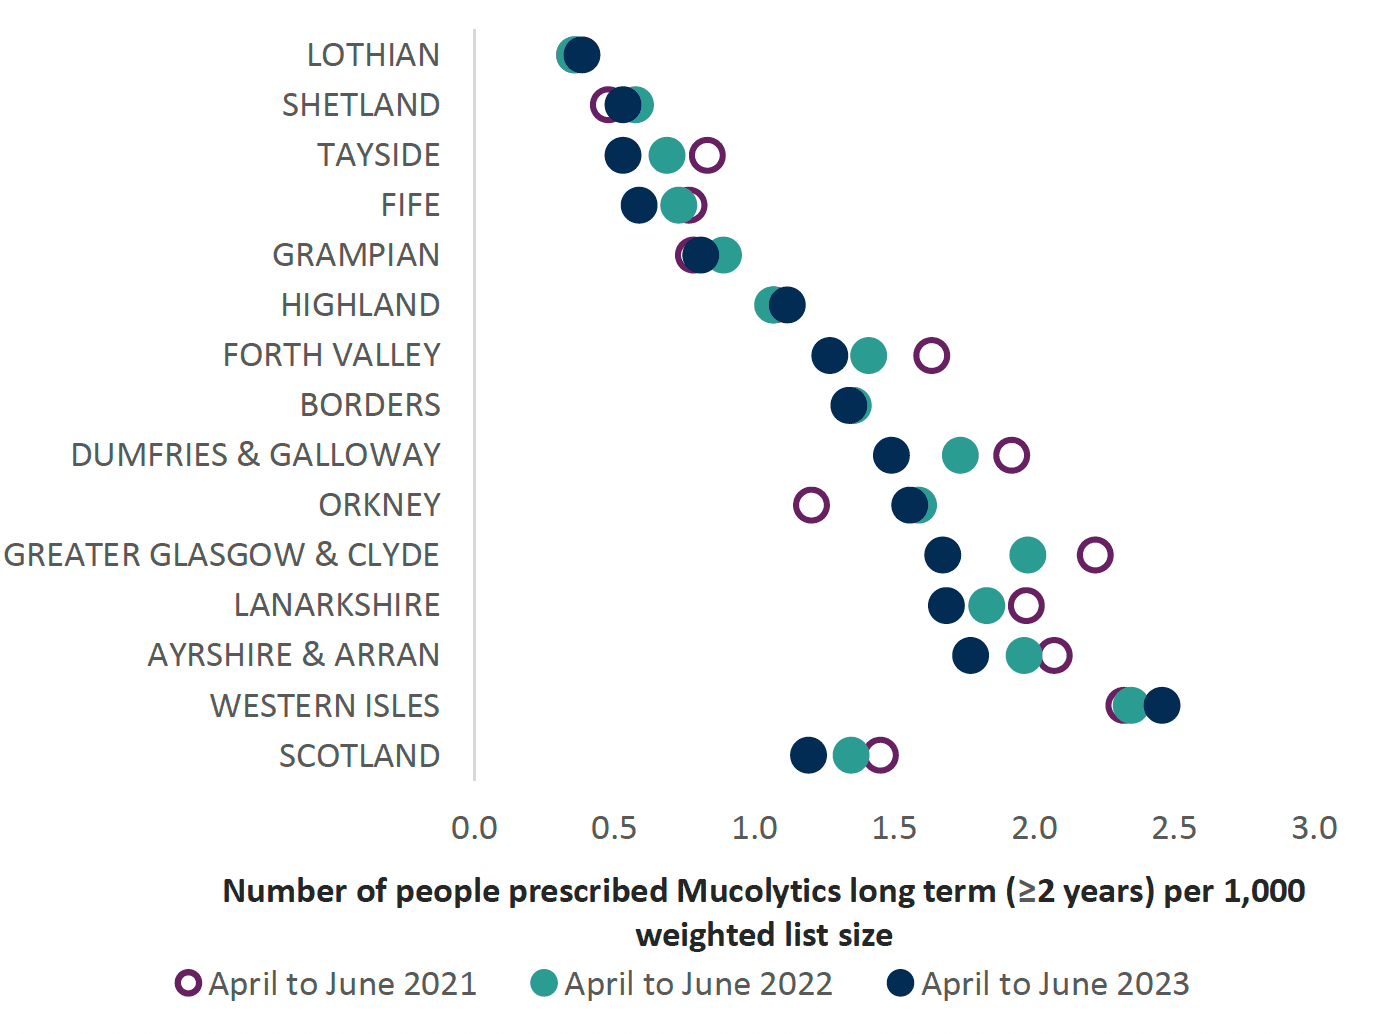 Chart showing variance across health boards and Scotland of Mucolytic Prescribing from 2021 to 2023. Overall Scotland trend is decreasing